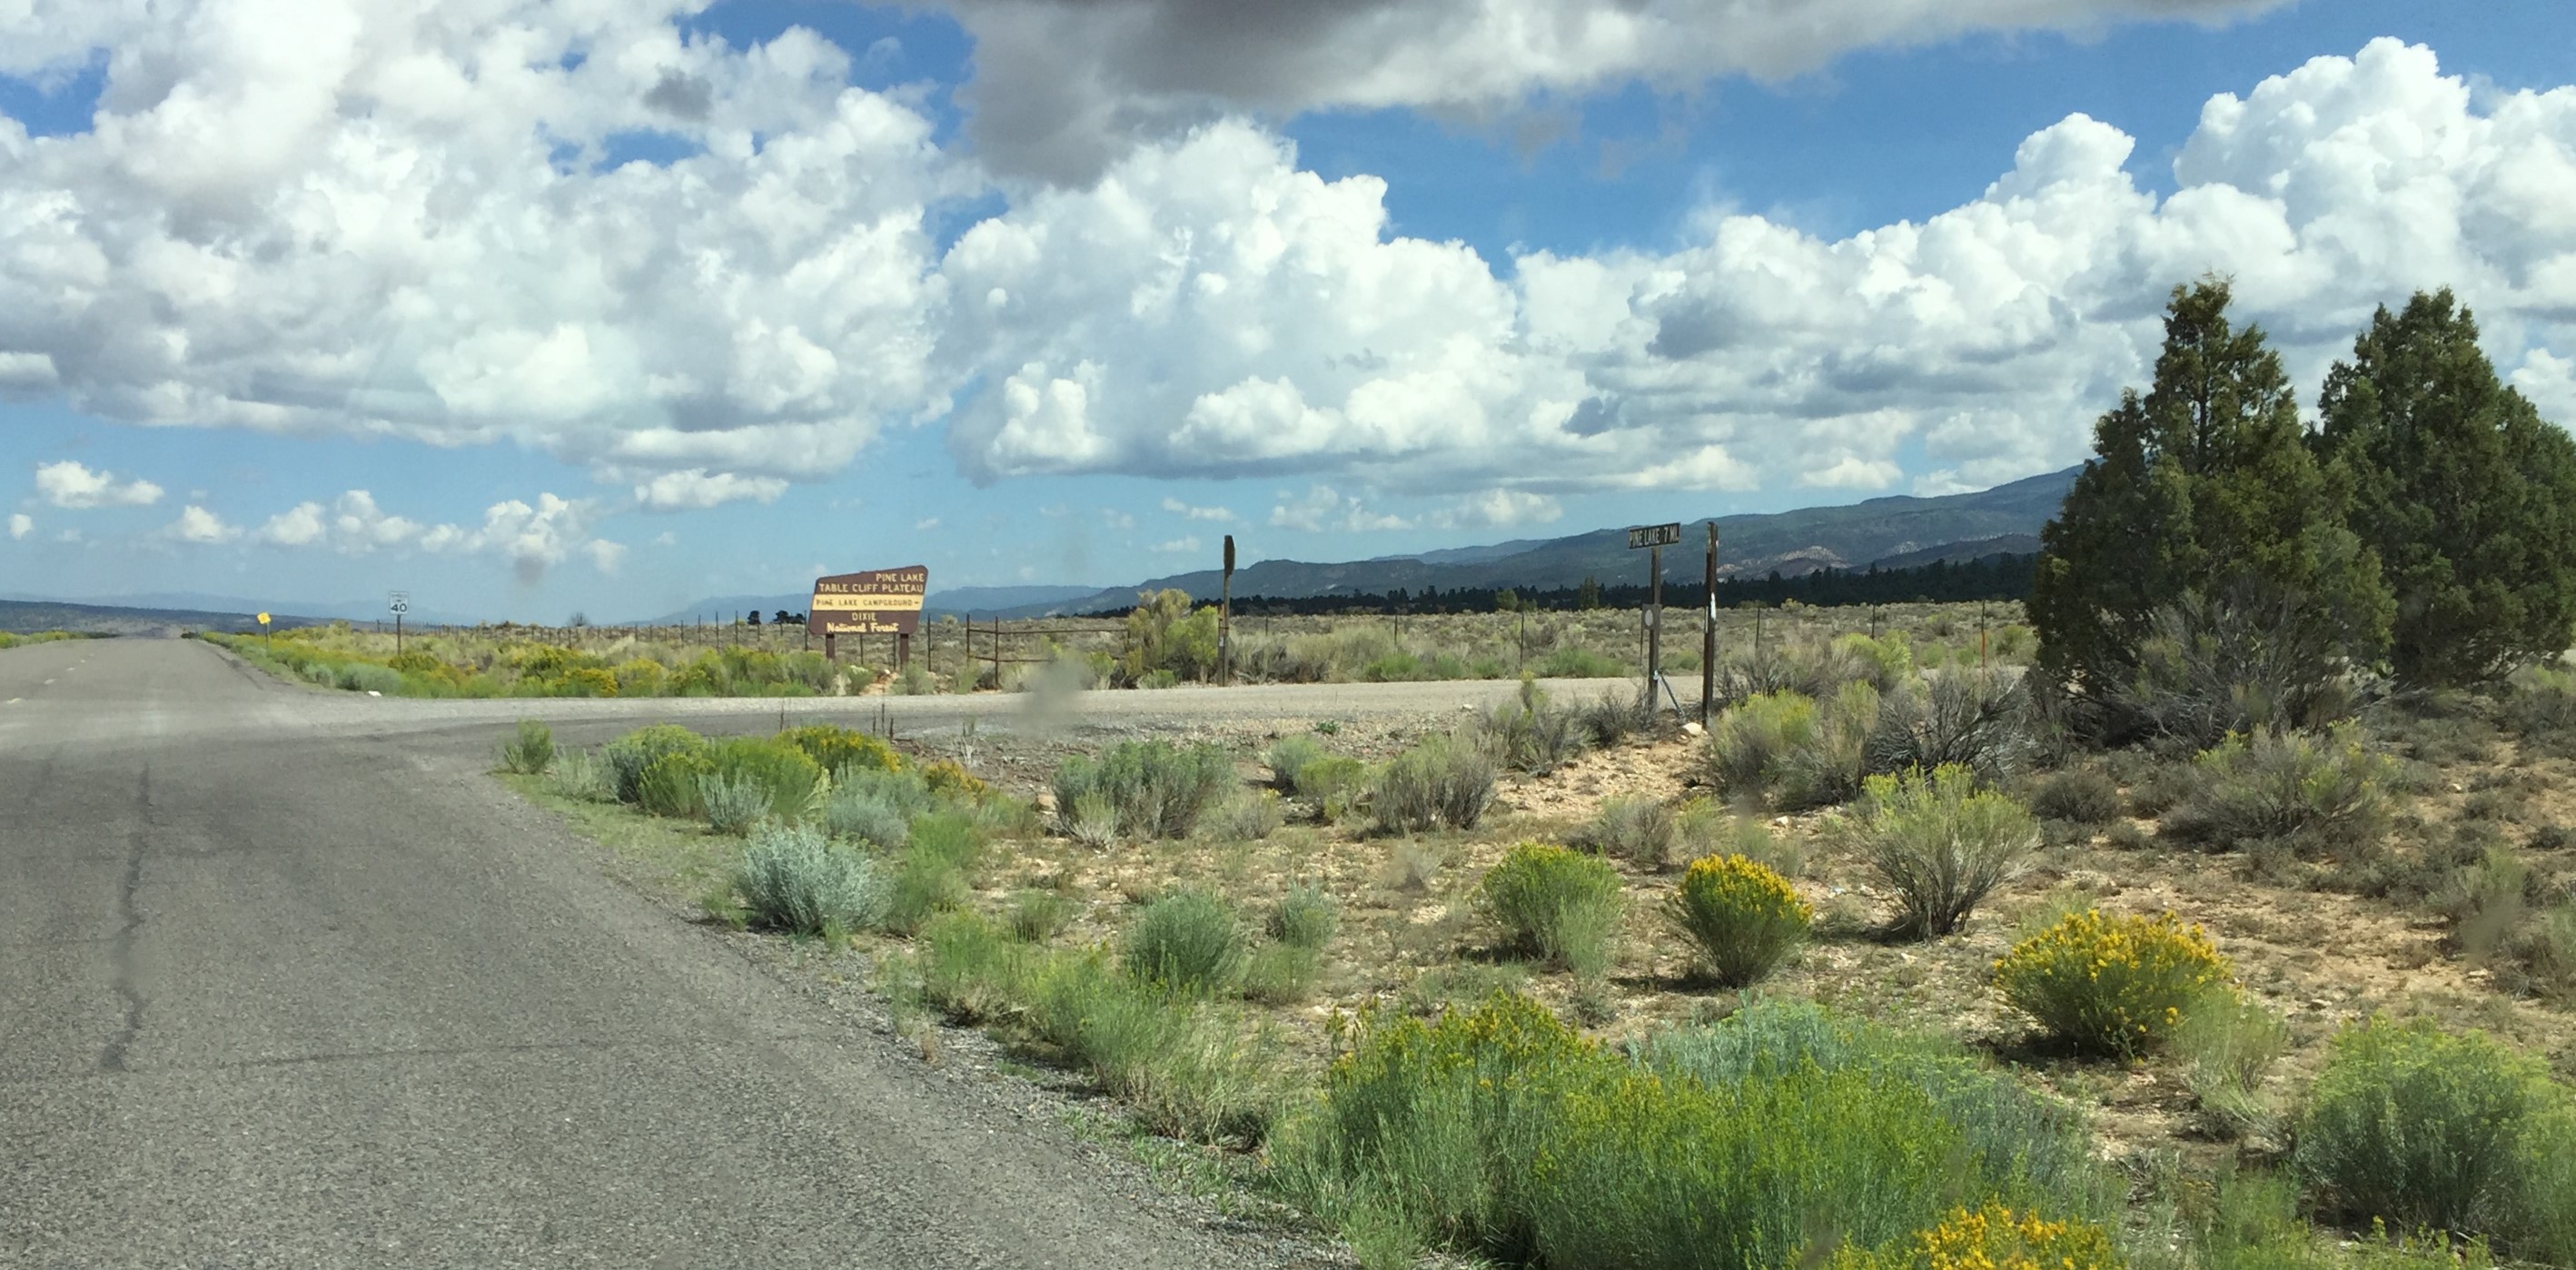 The turnoff from UT Highway 22 to Forest Service Road 132